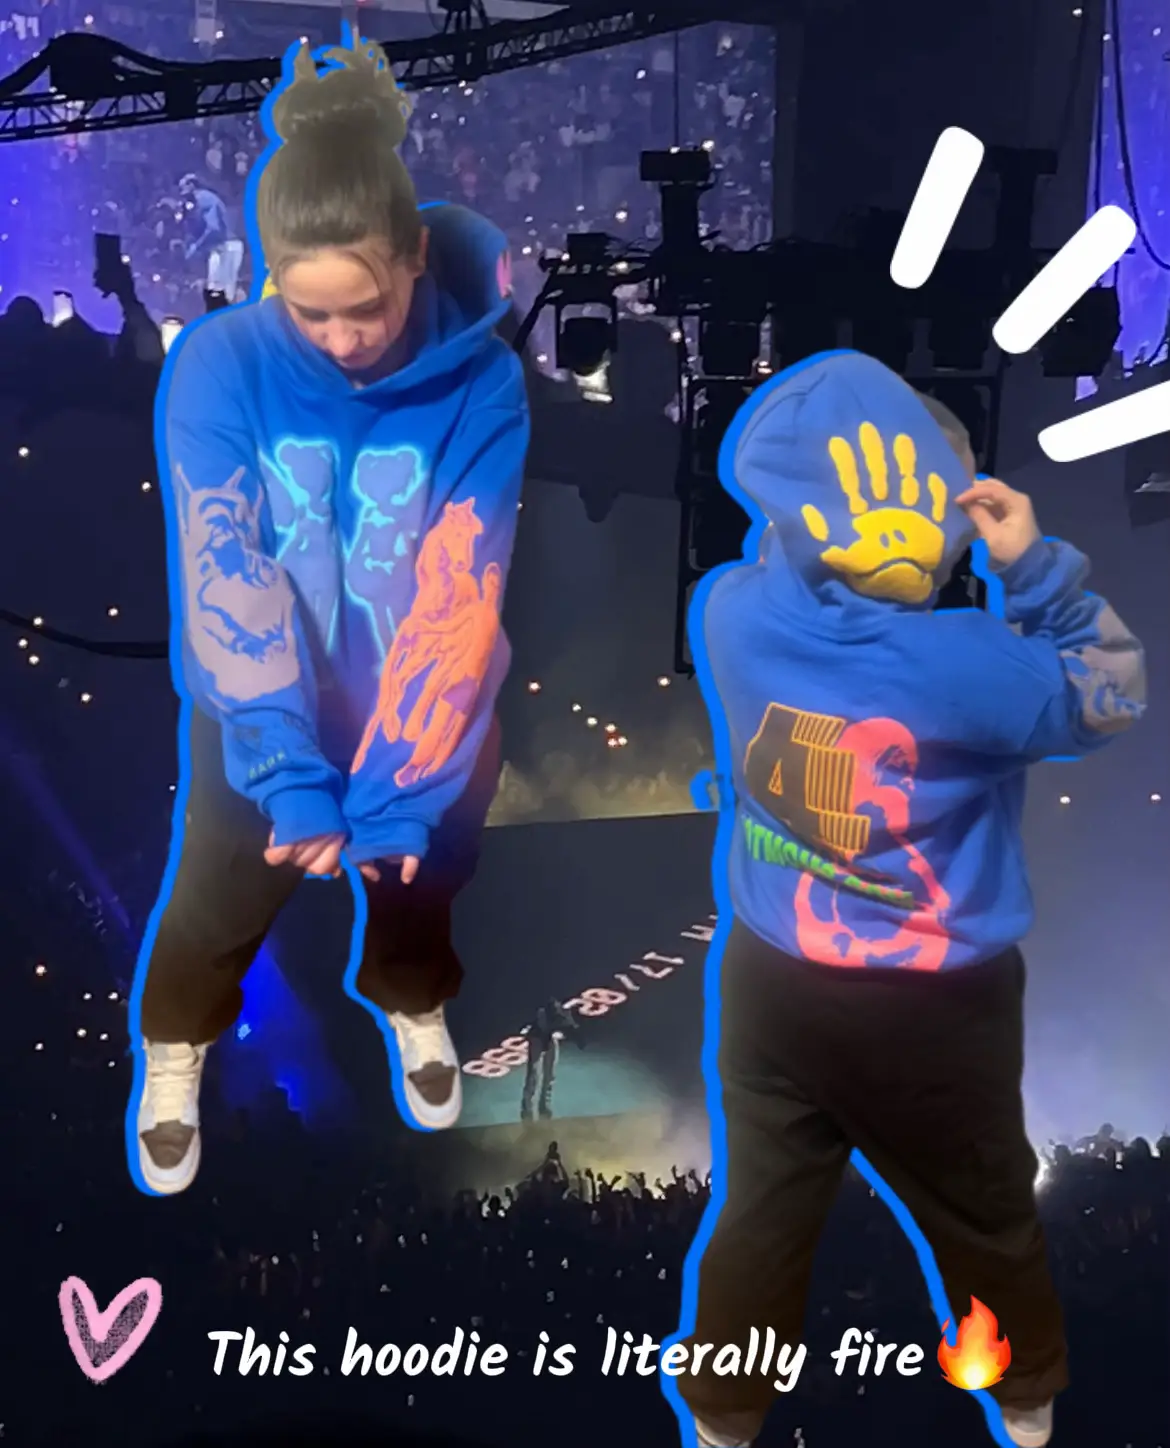  Two children are wearing hoodies with different designs, and they are both jumping in the air.